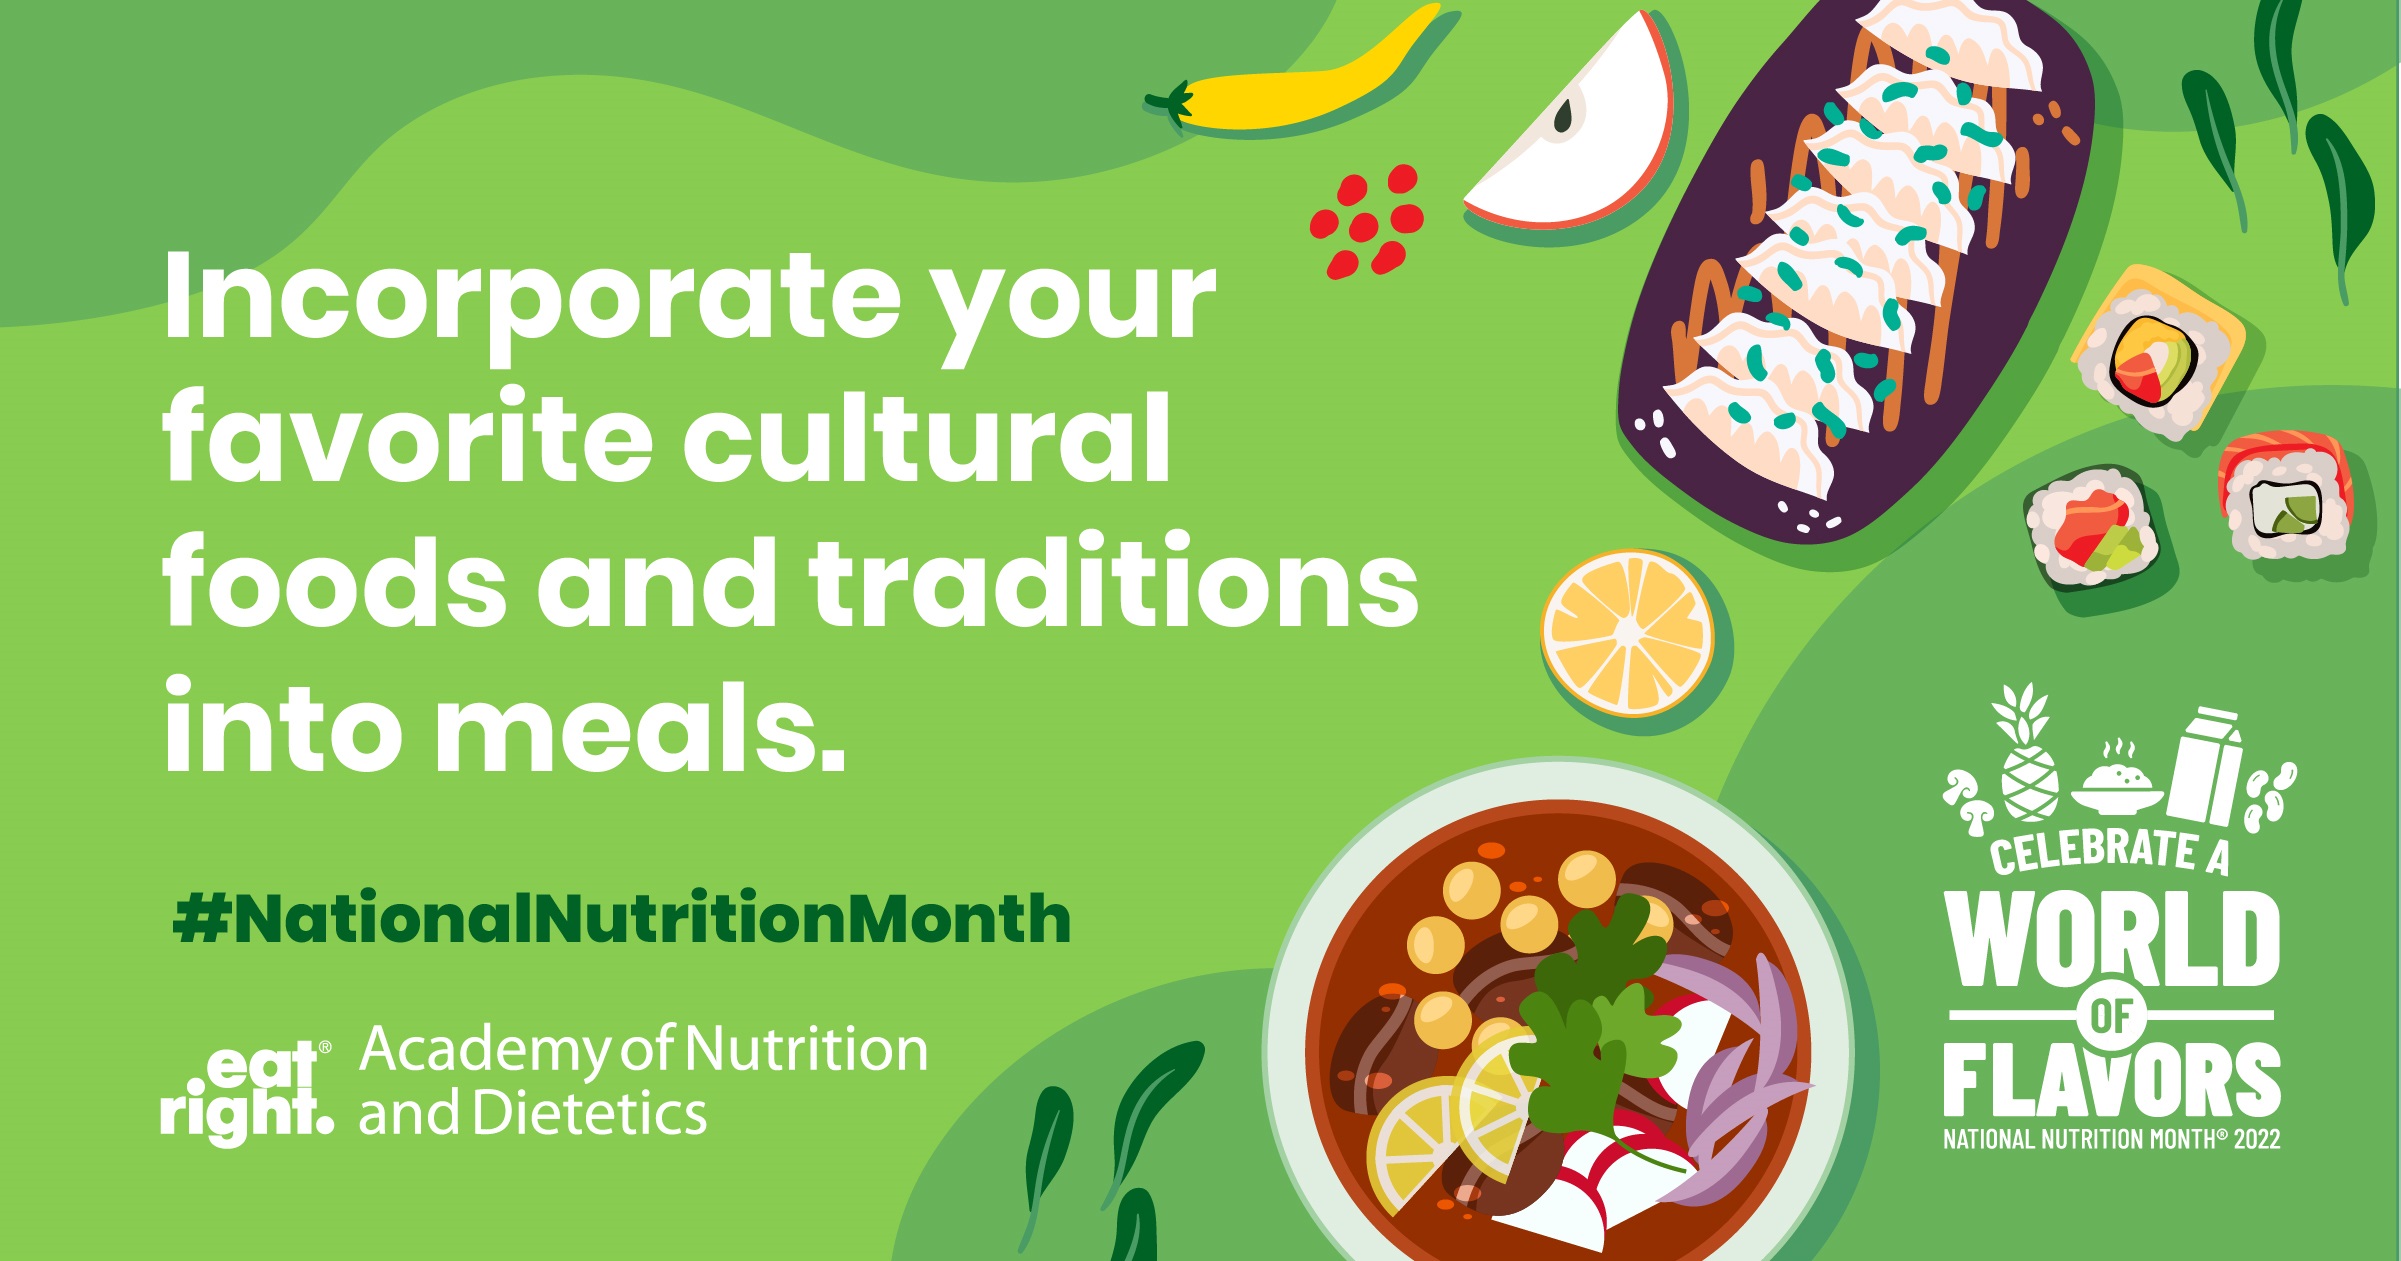 National Nutrition Month Graphic: Incorporate your favorite cultural foods and traditions into meals